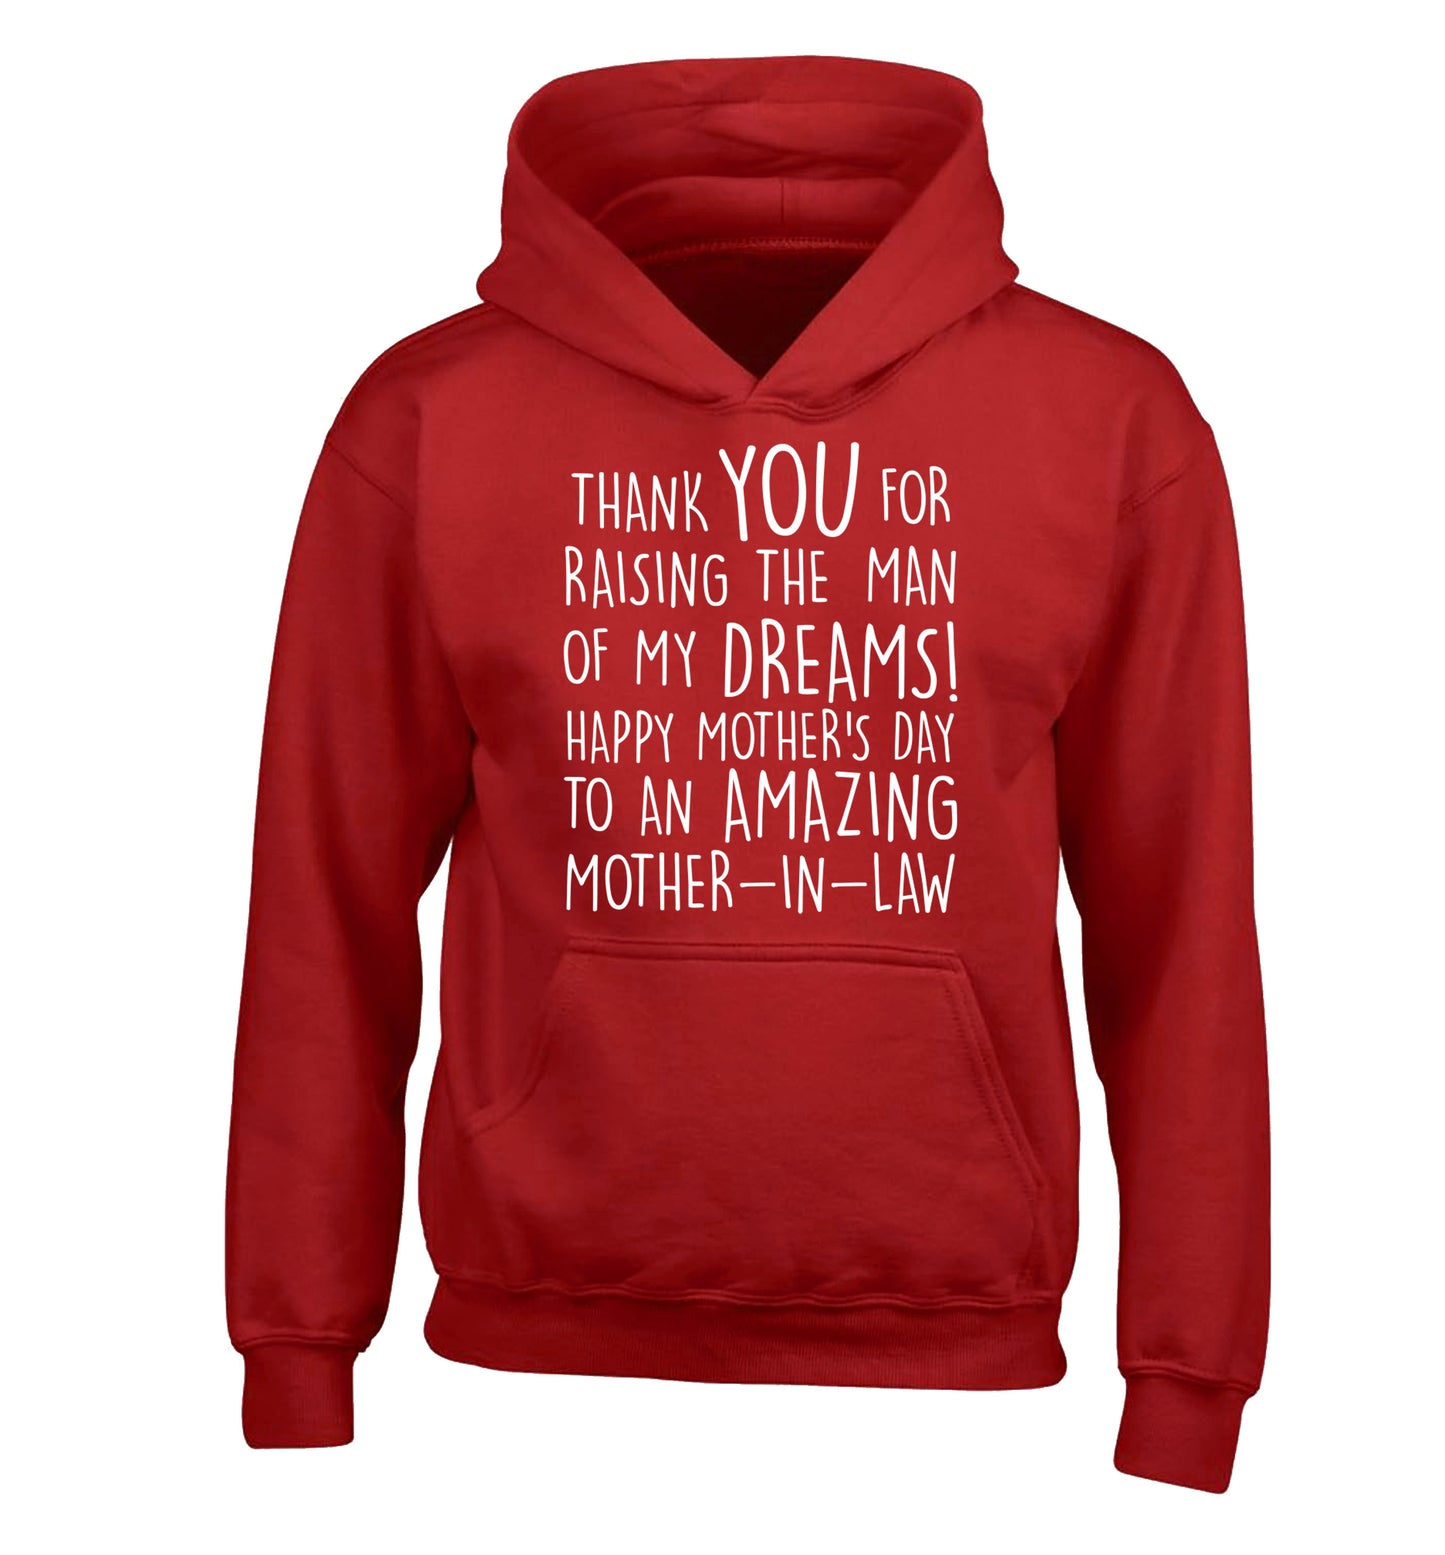 Thank you for raising the man of my dreams happy mother's day mother-in-law children's red hoodie 12-13 Years